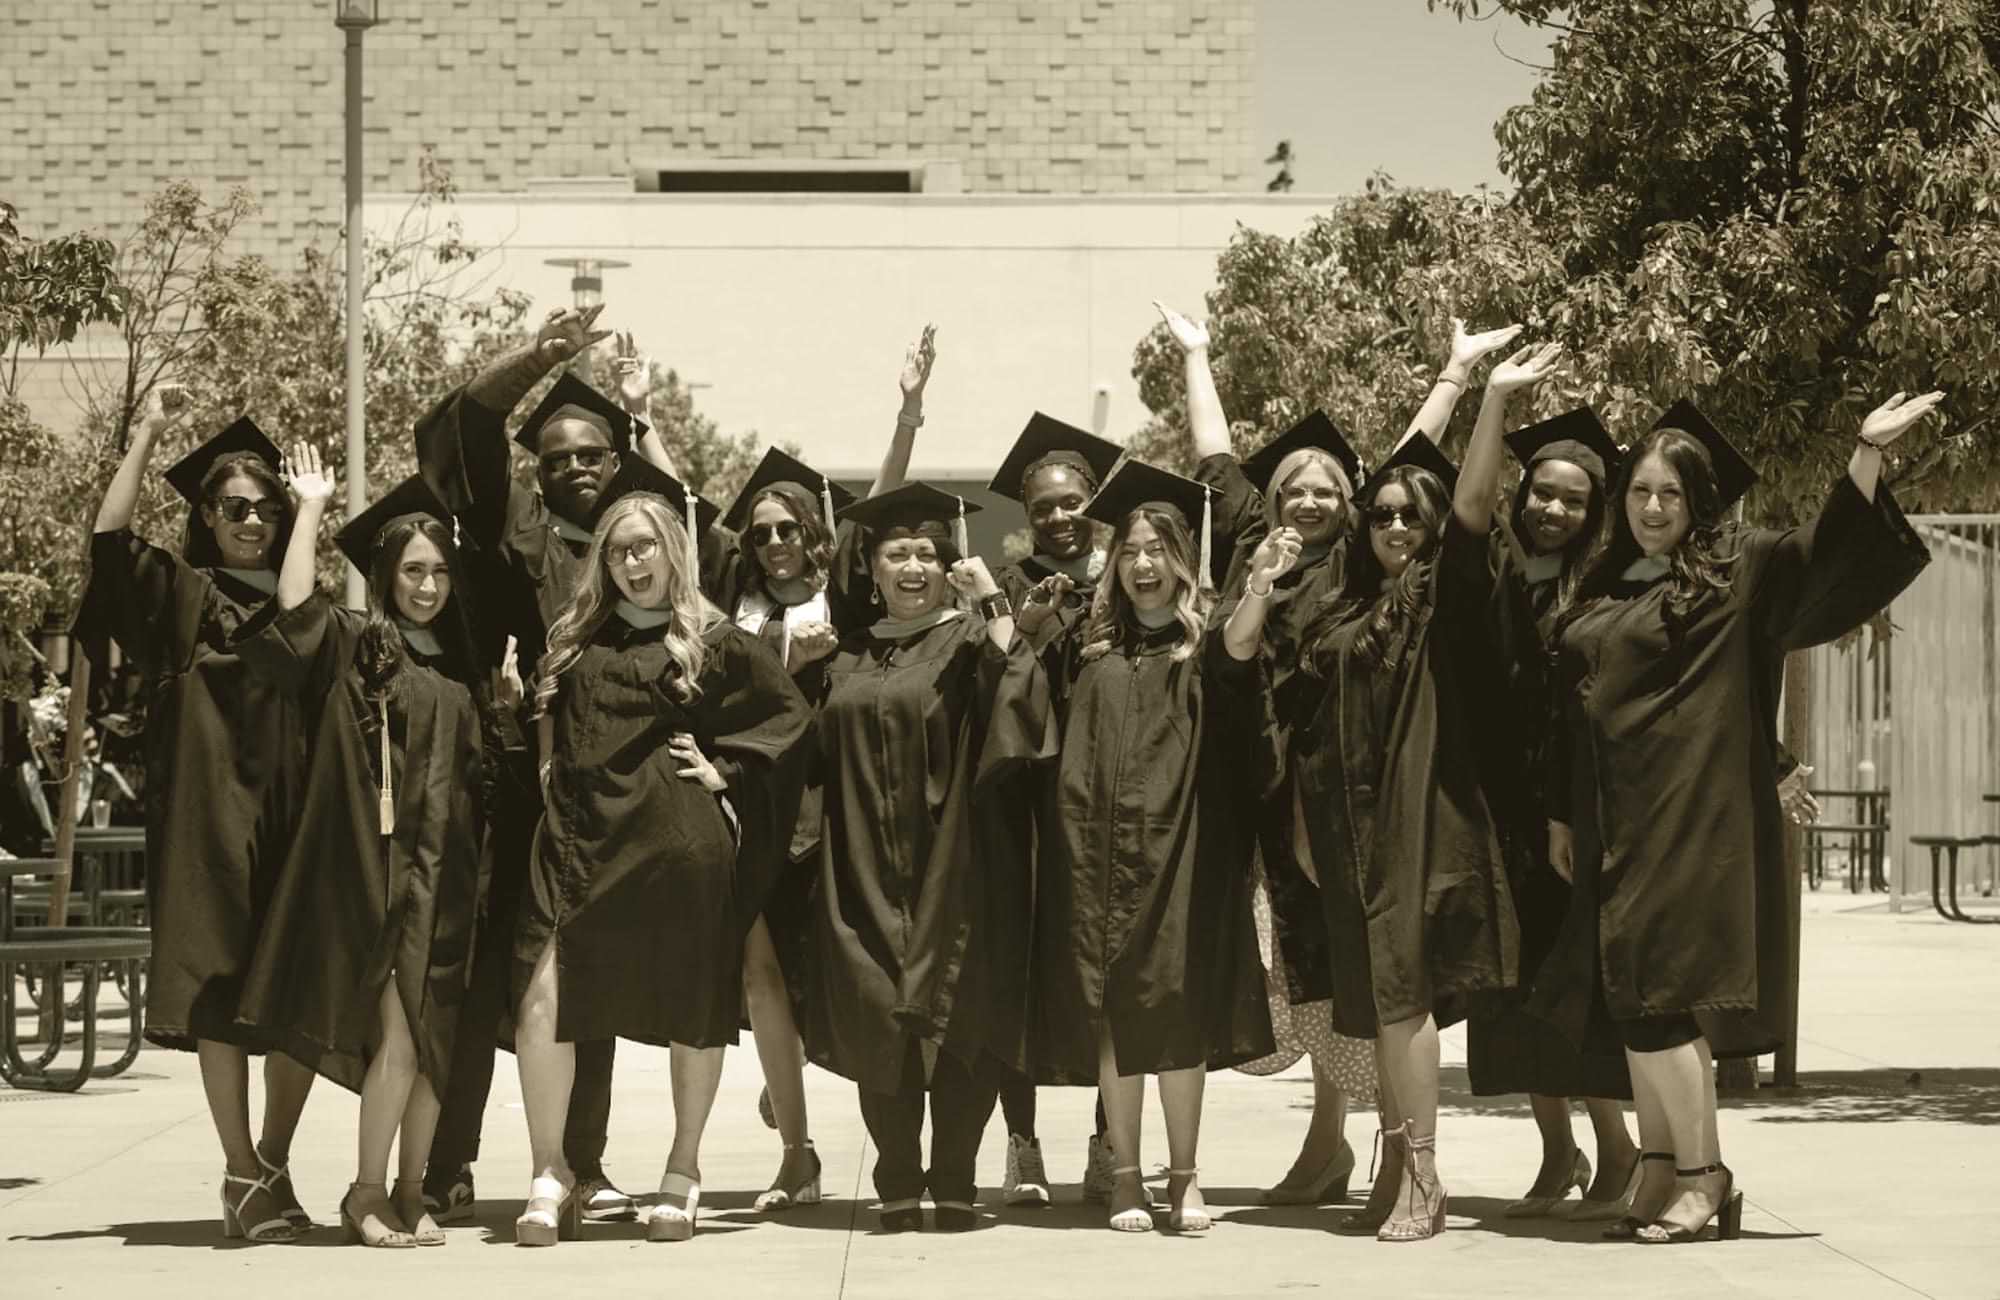 adult graduates pictured wearing robes and caps and standing together in celebration 